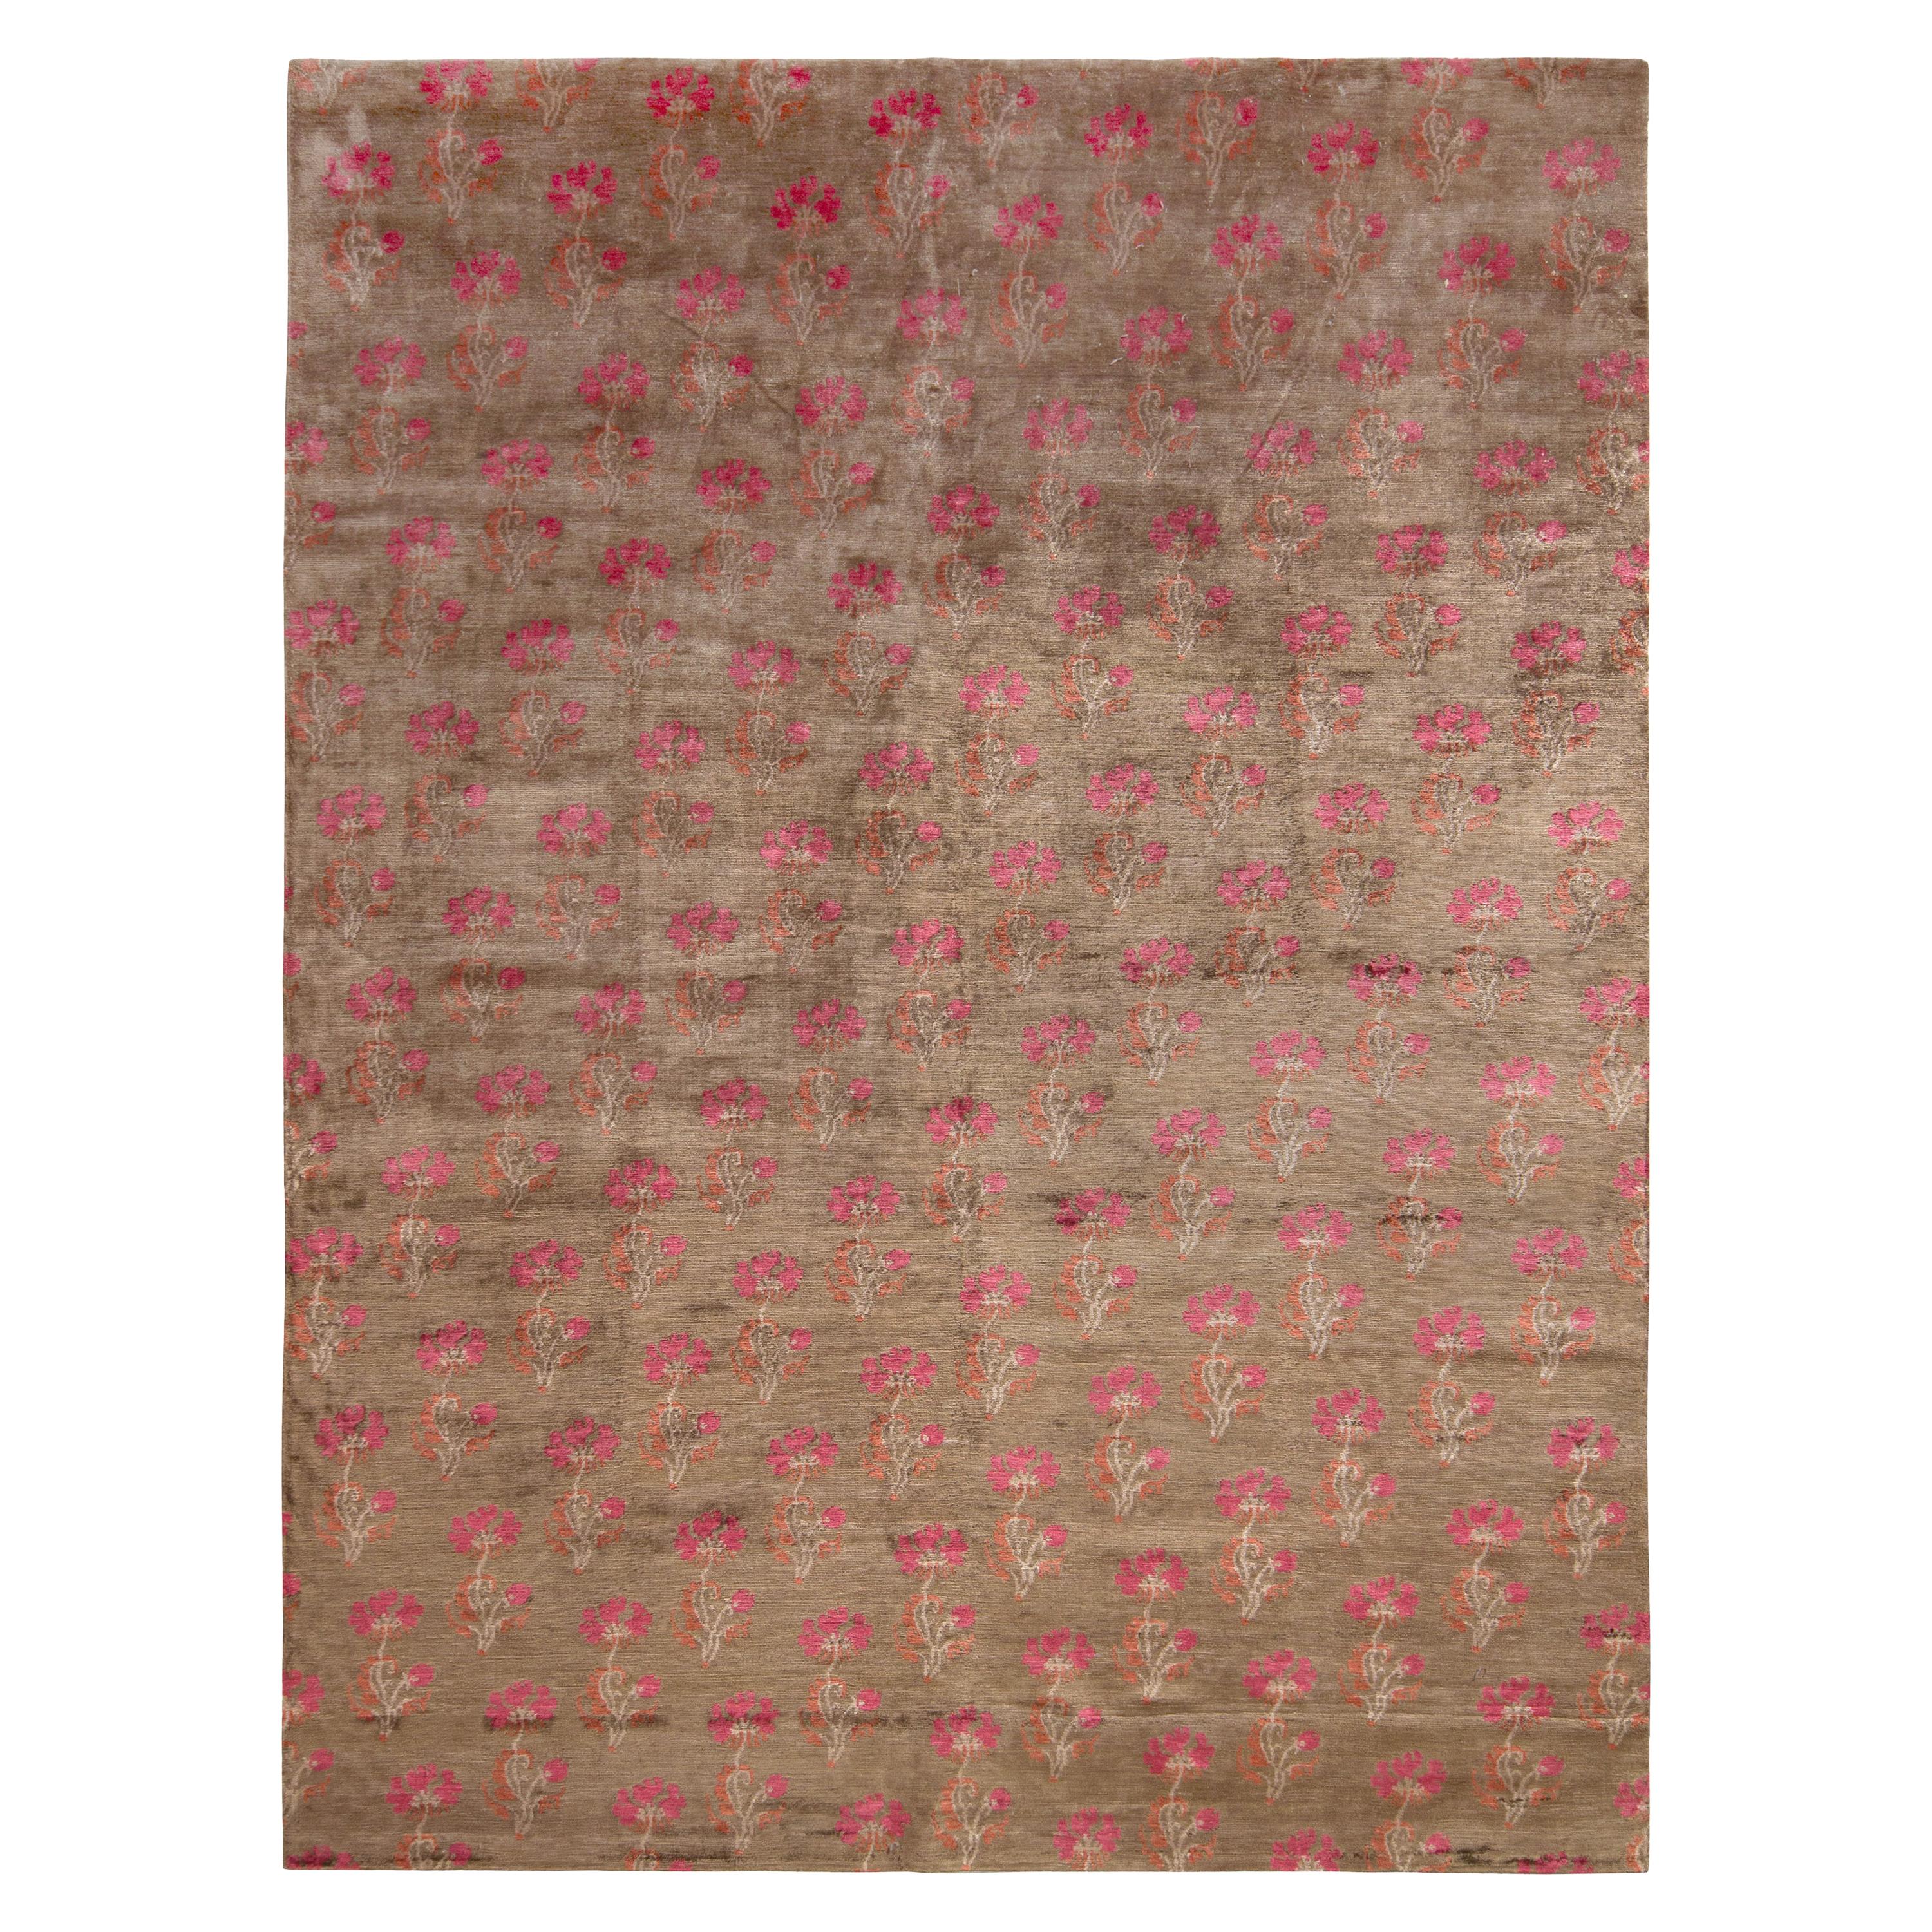 Rug & Kilim’s Handmade Transitional Rug in Brown and Pink Floral Pattern